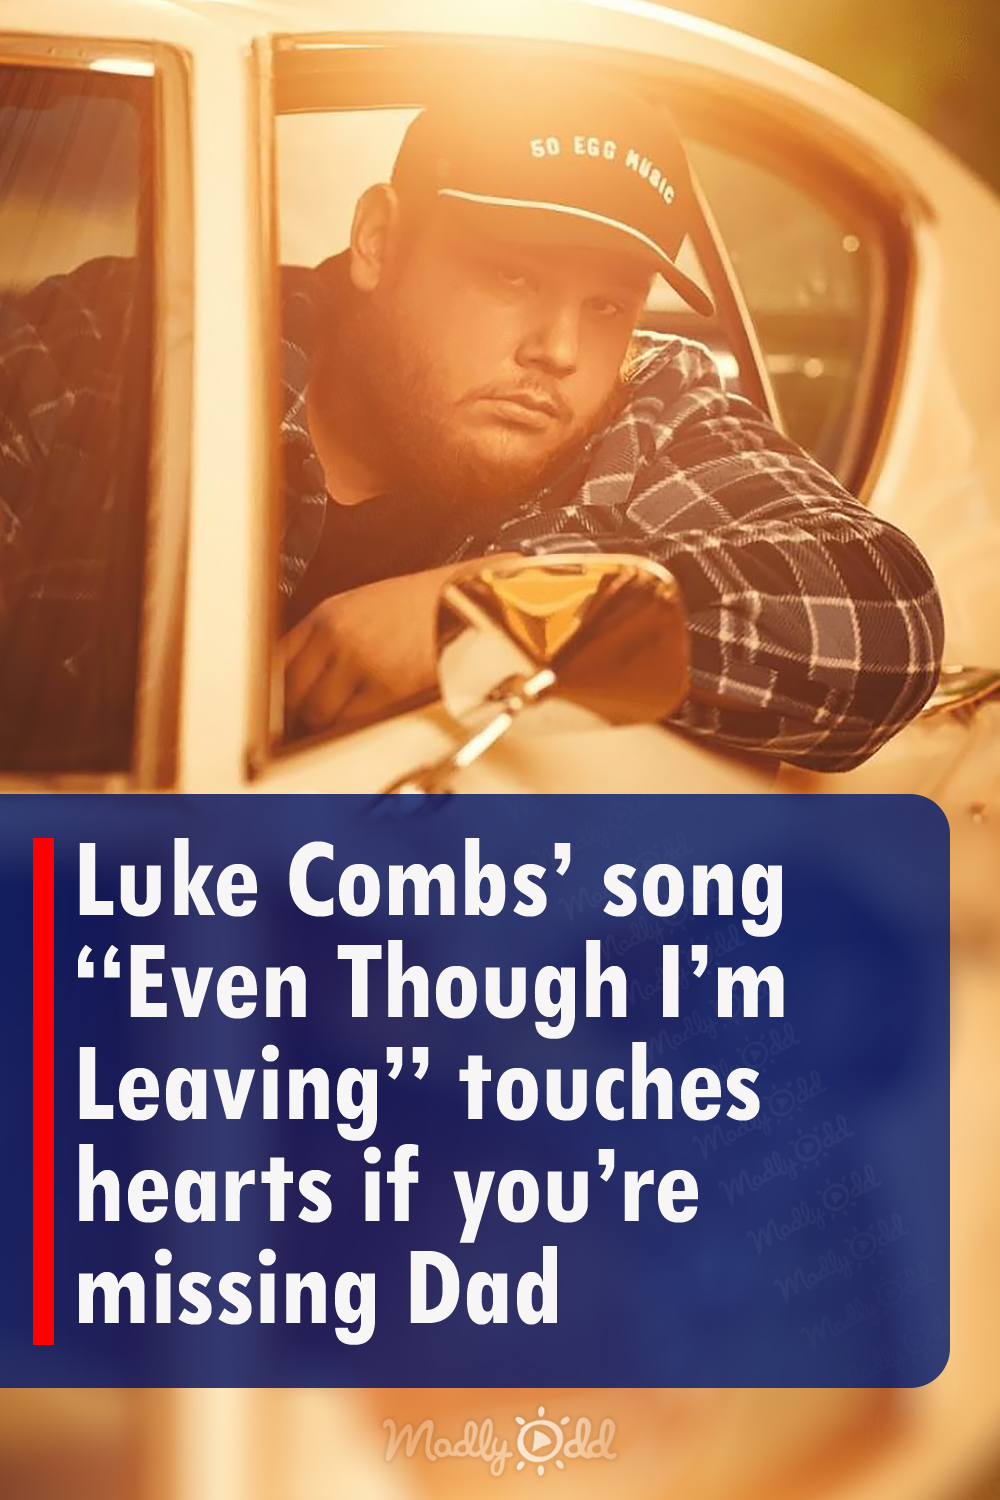 Luke Combs’ song “Even Though I’m Leaving” touches hearts if you’re missing Dad